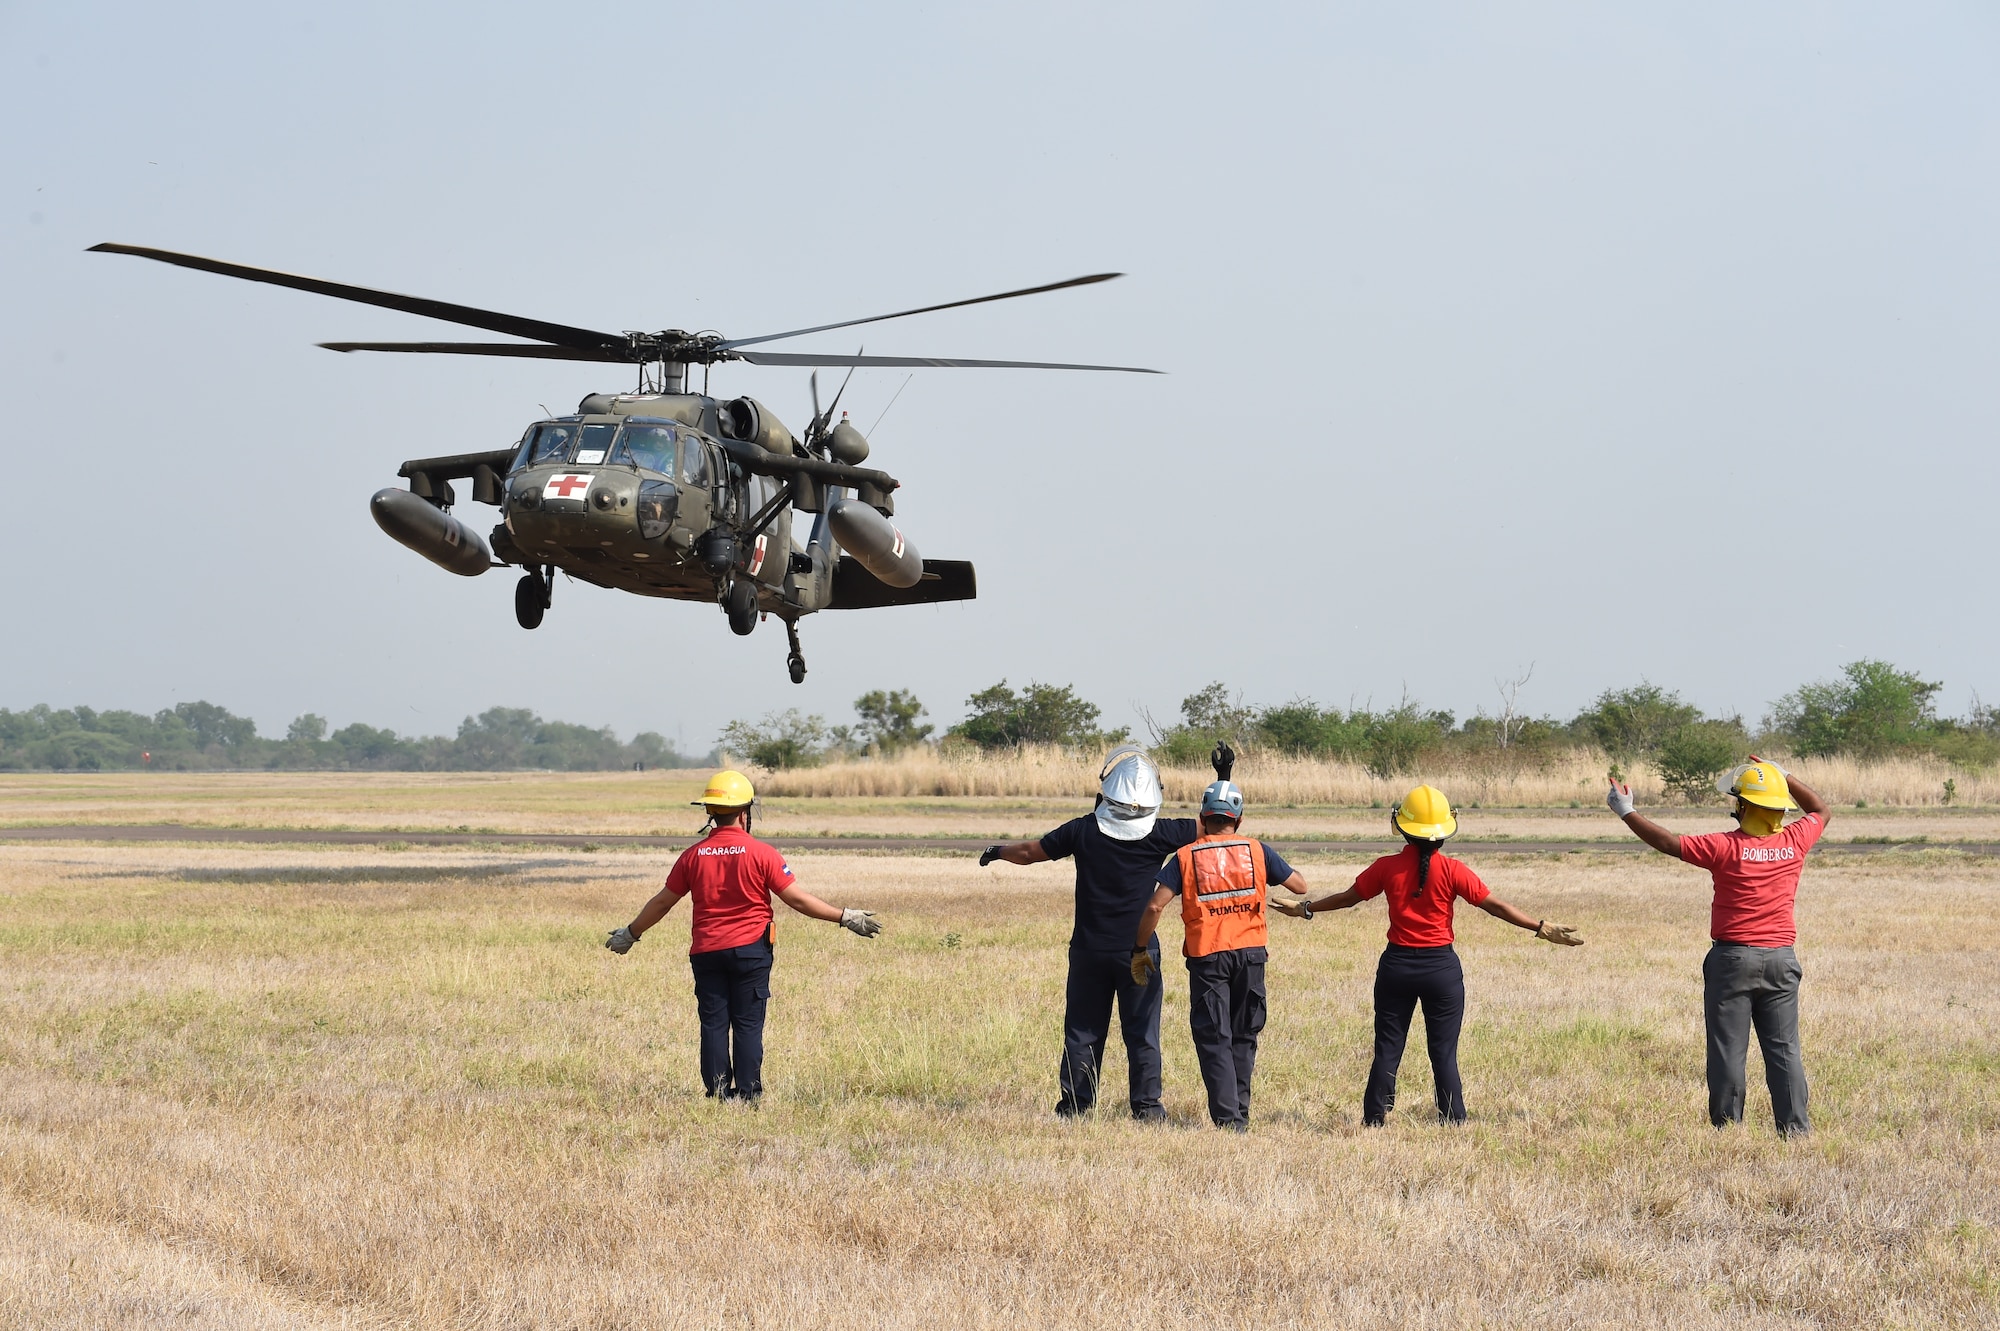 Firefighters hail an HH-60 Blackhawk as part of a simulated emergency rescue operation April 23, 2015, at Soto Cano Air Base, Honduras. The simulated rescue was part of the Central America Sharing Mutual Operations Knowledge and Experience exercise, designed to build partnership capabilities by bring firefighters from the U.S. and Central American countries together as a unified team. (Photo by Martin Chahin)